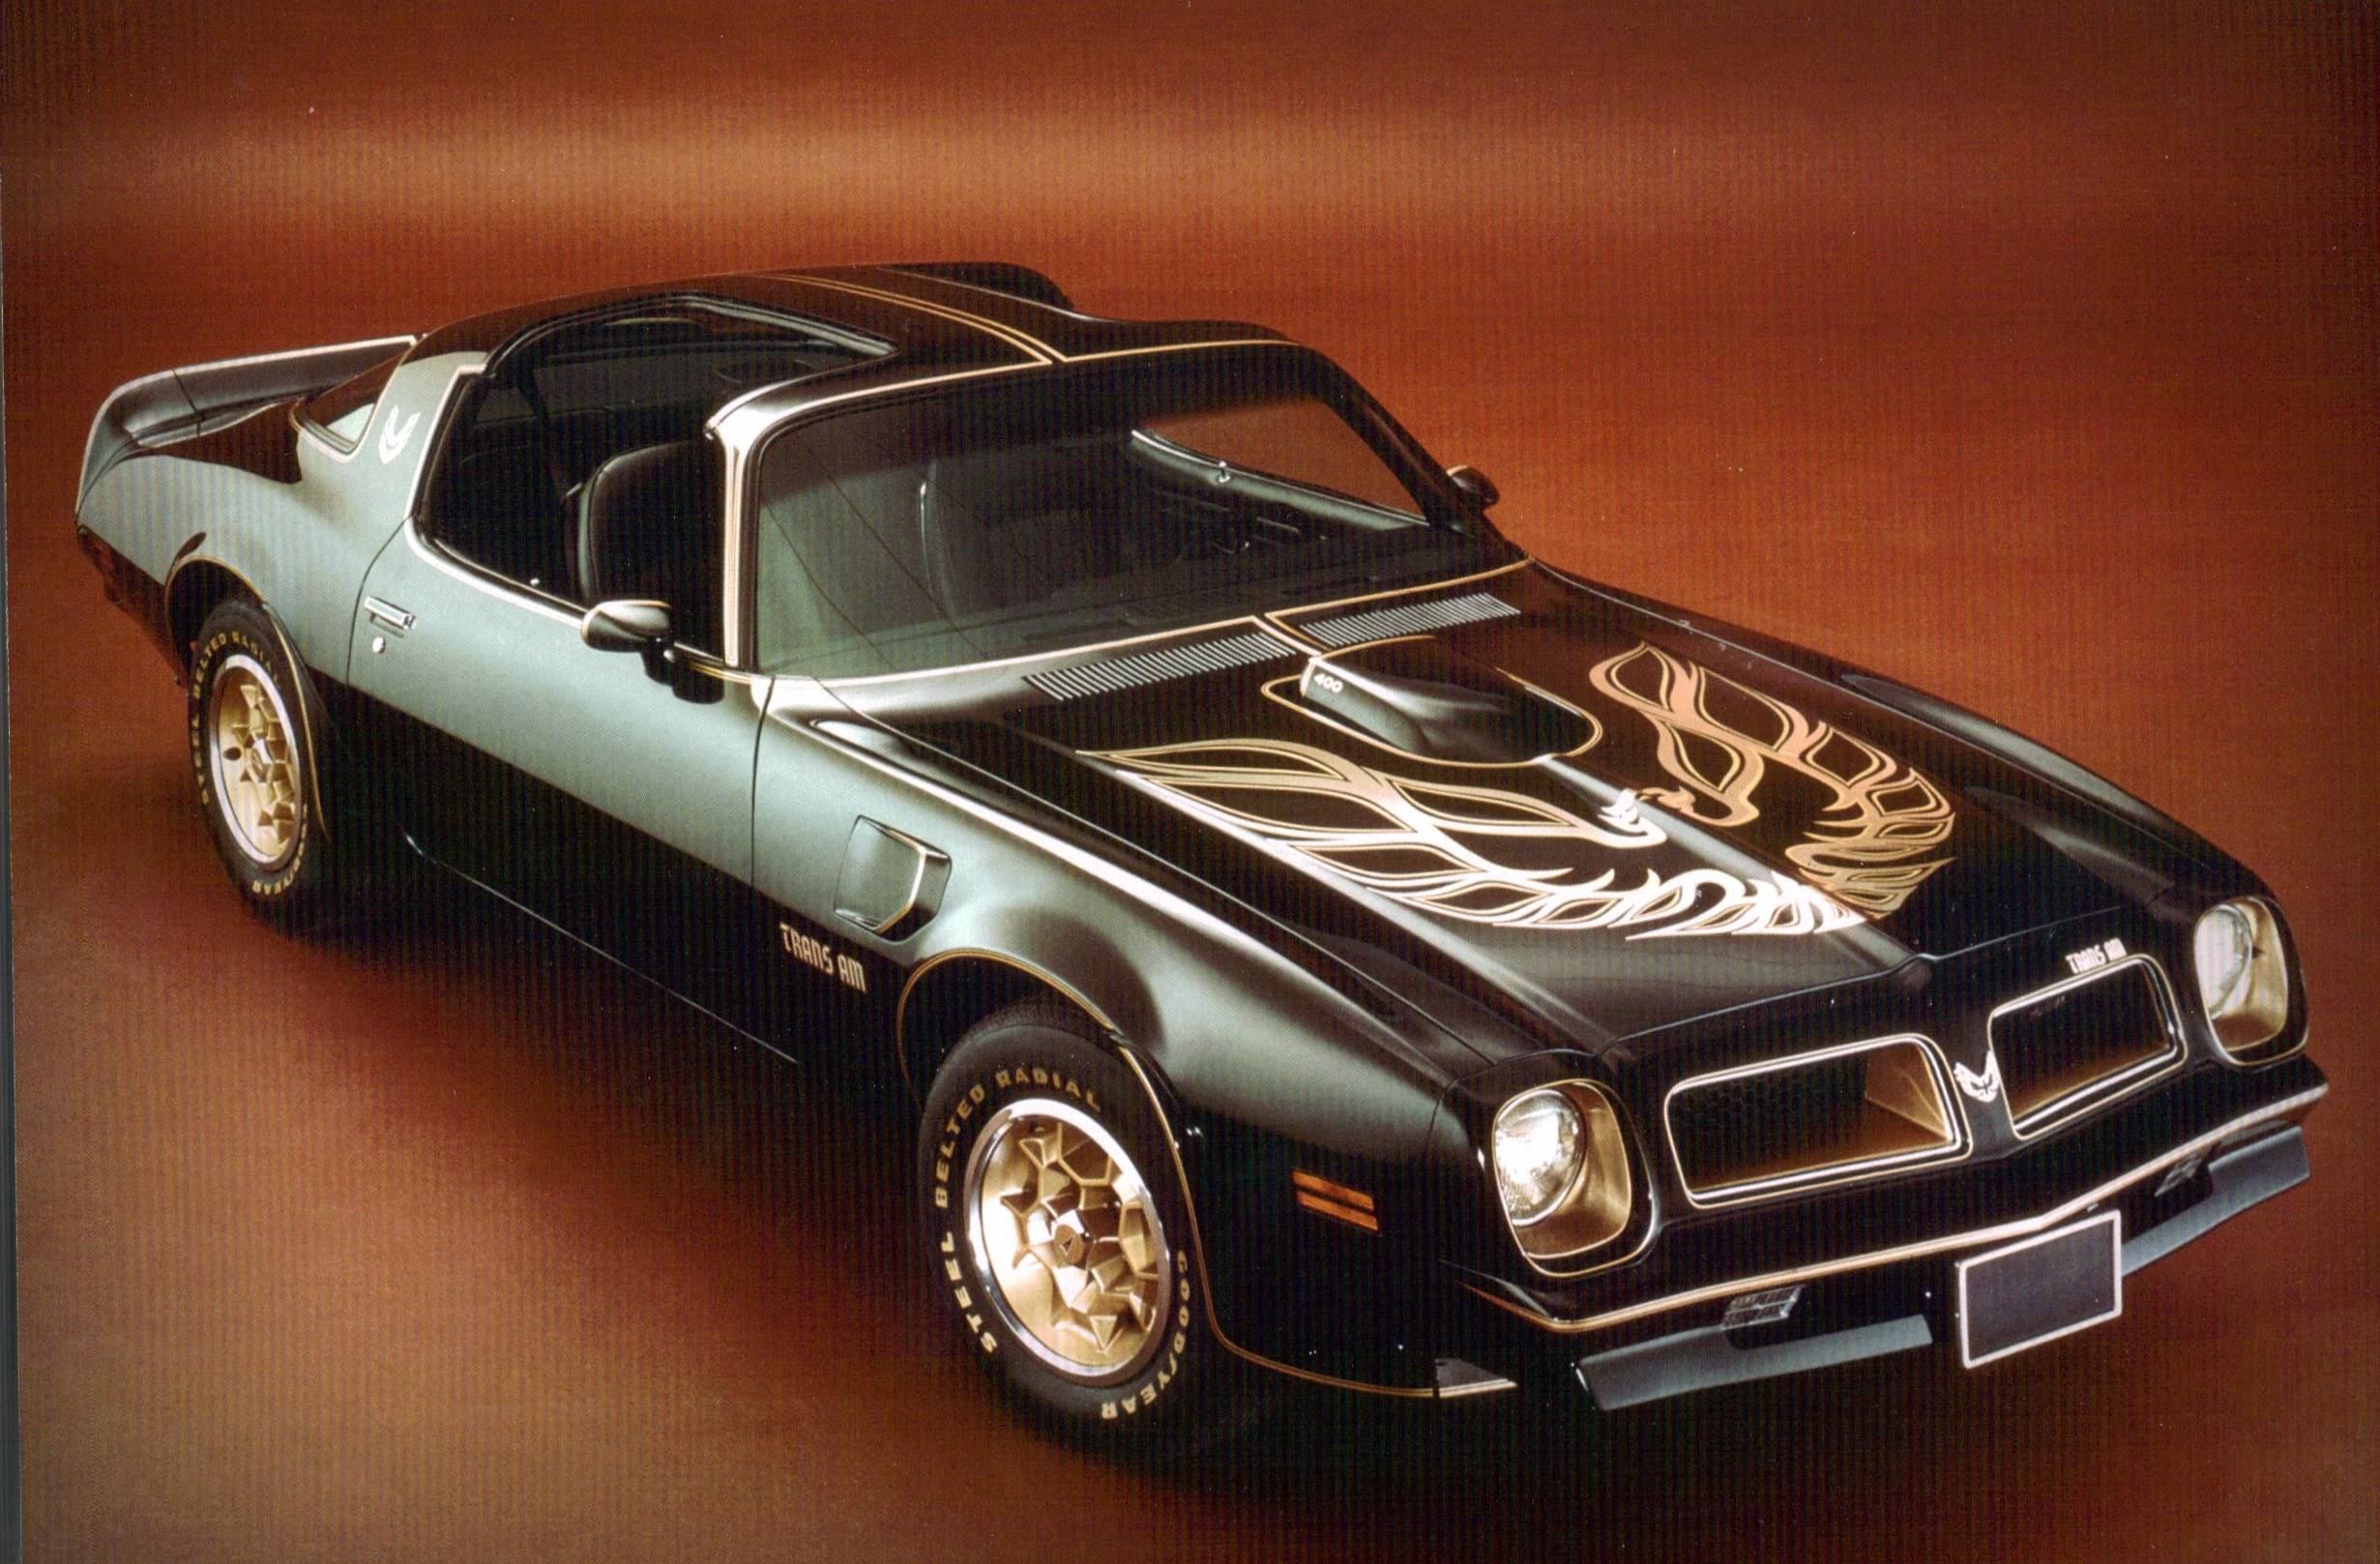 Pontiac Firebird Trans Am Image. Picture and Videos